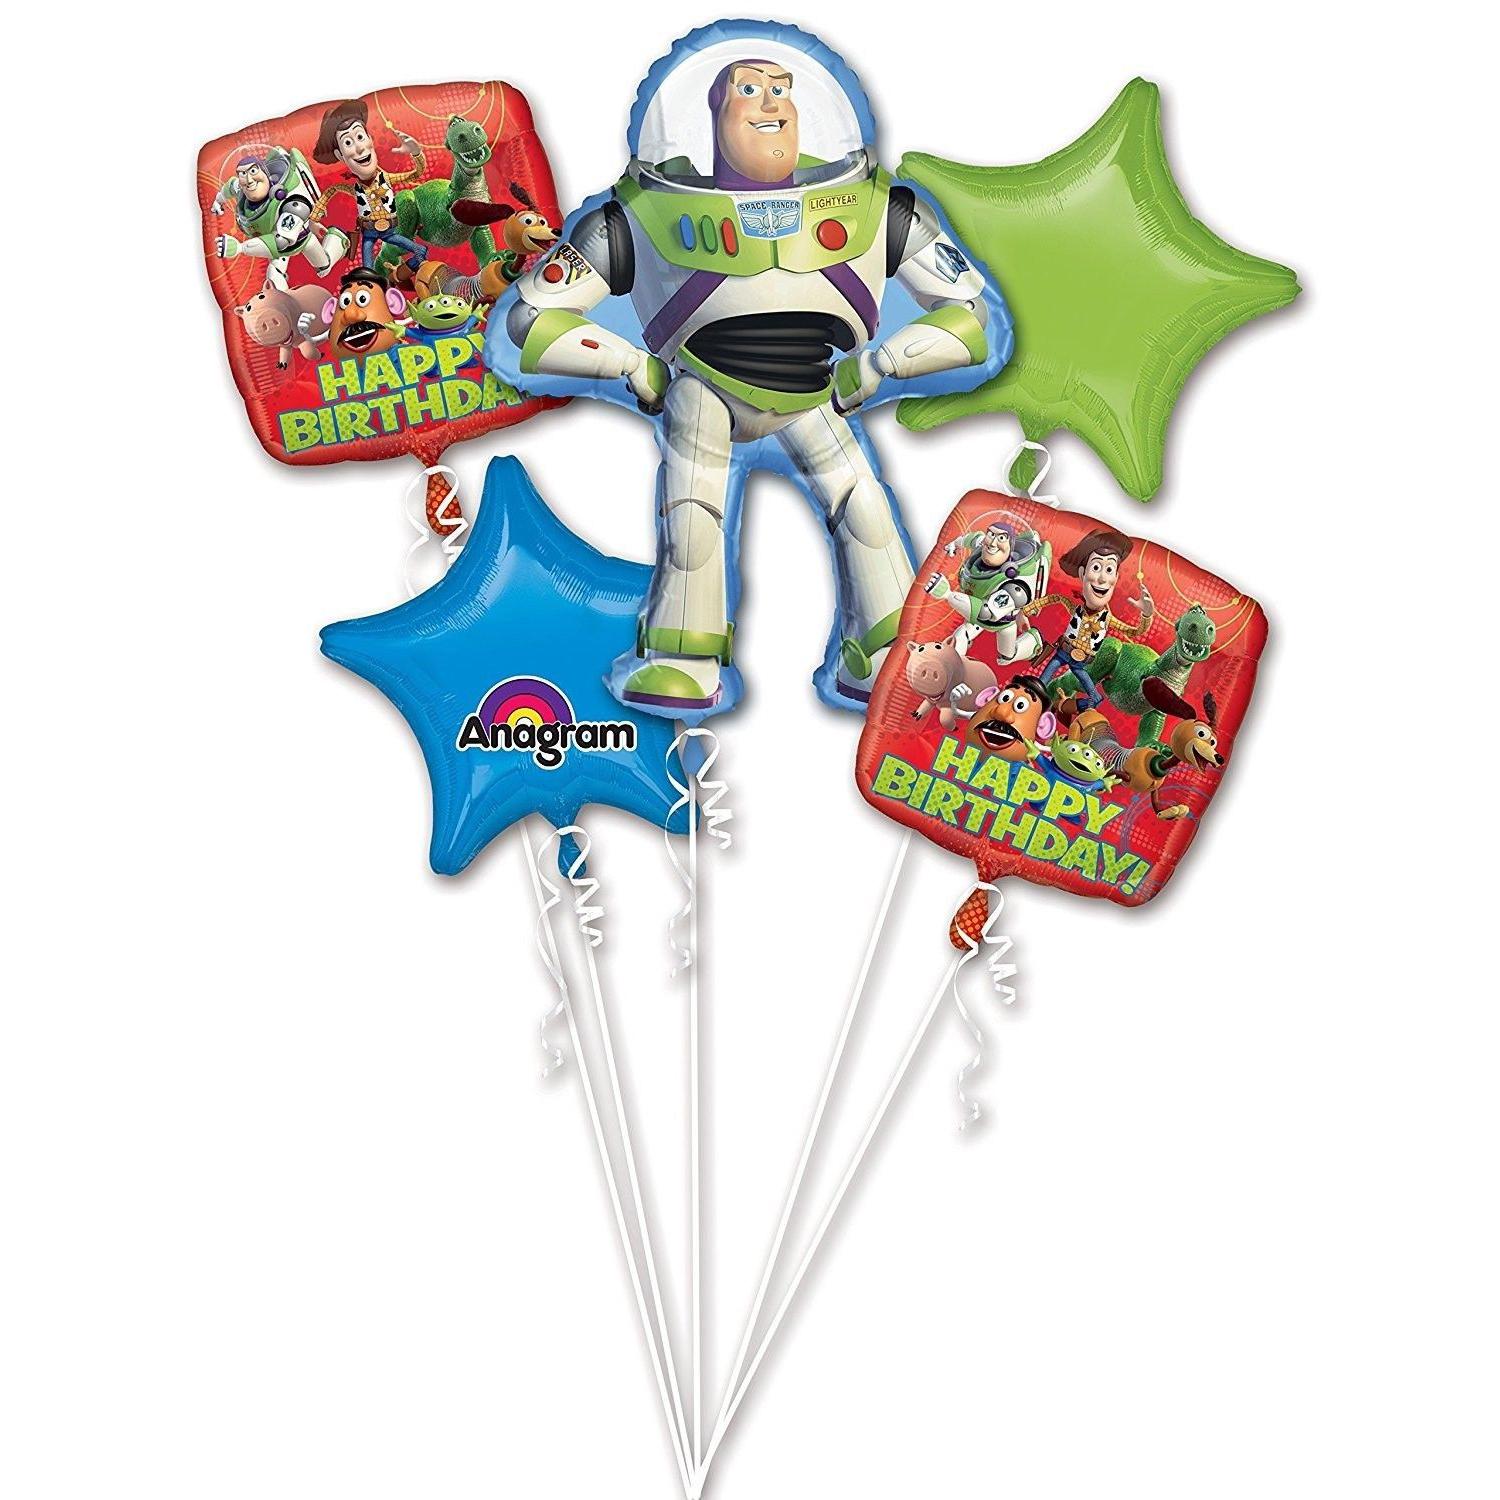 Toy Story Gang Birthday Balloon Bouquet 5pcs Balloons & Streamers - Party Centre